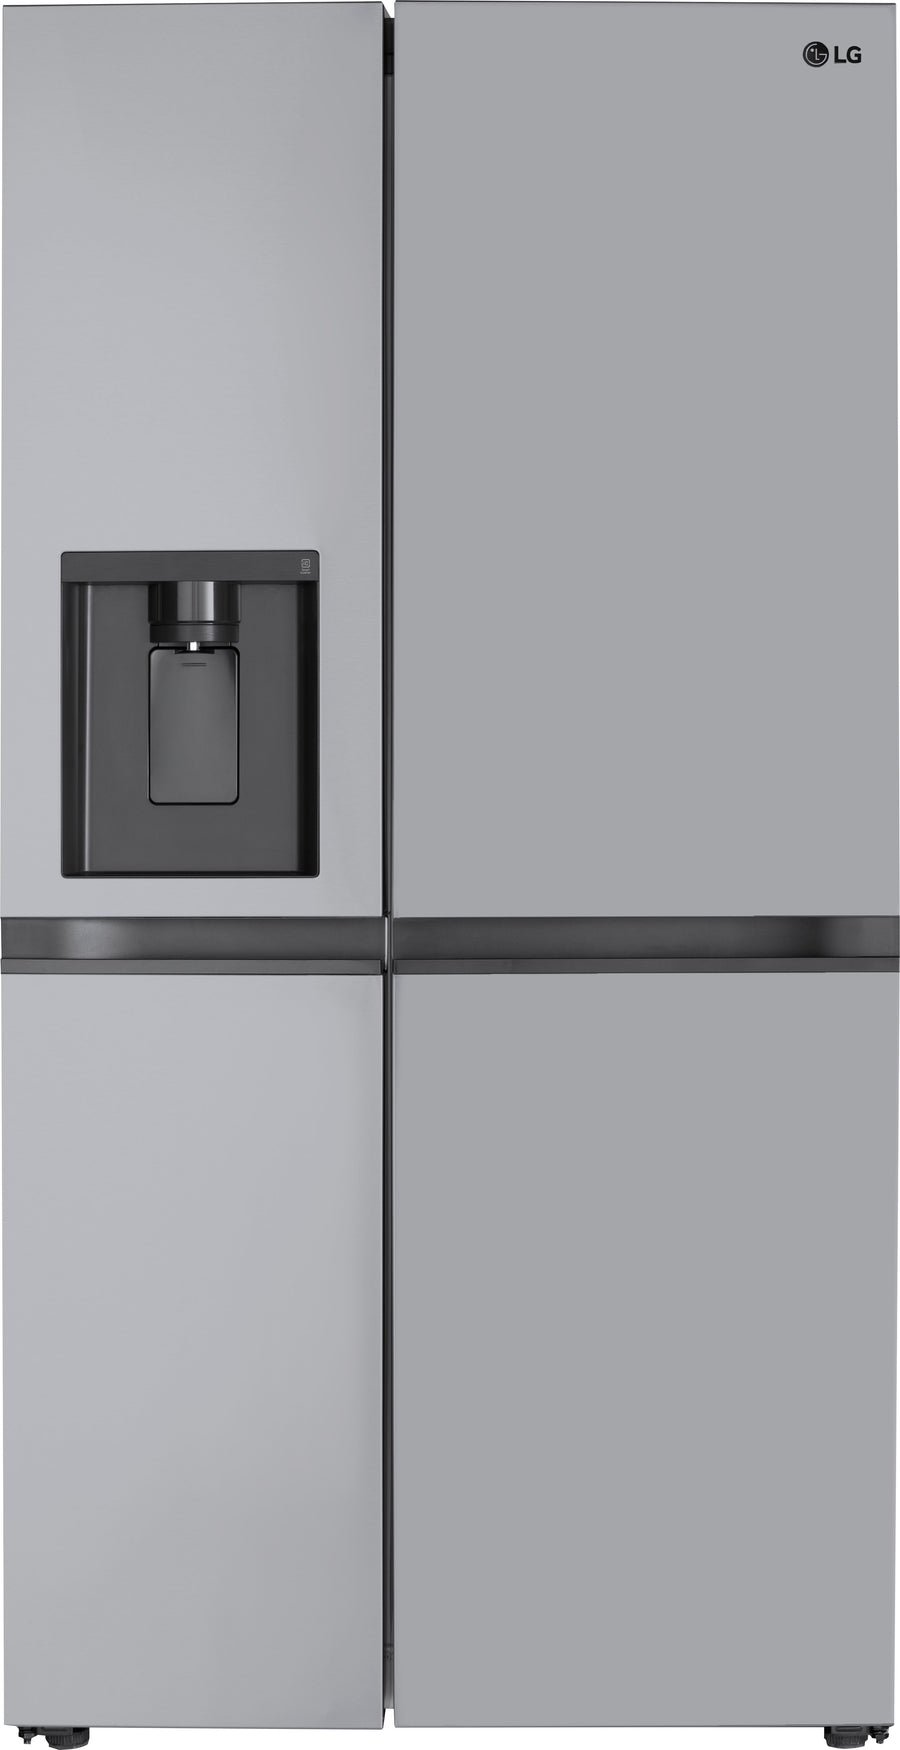 LG - 27.6 Cu. Ft. Side-by-Side Smart Refrigerator - Stainless steel_0